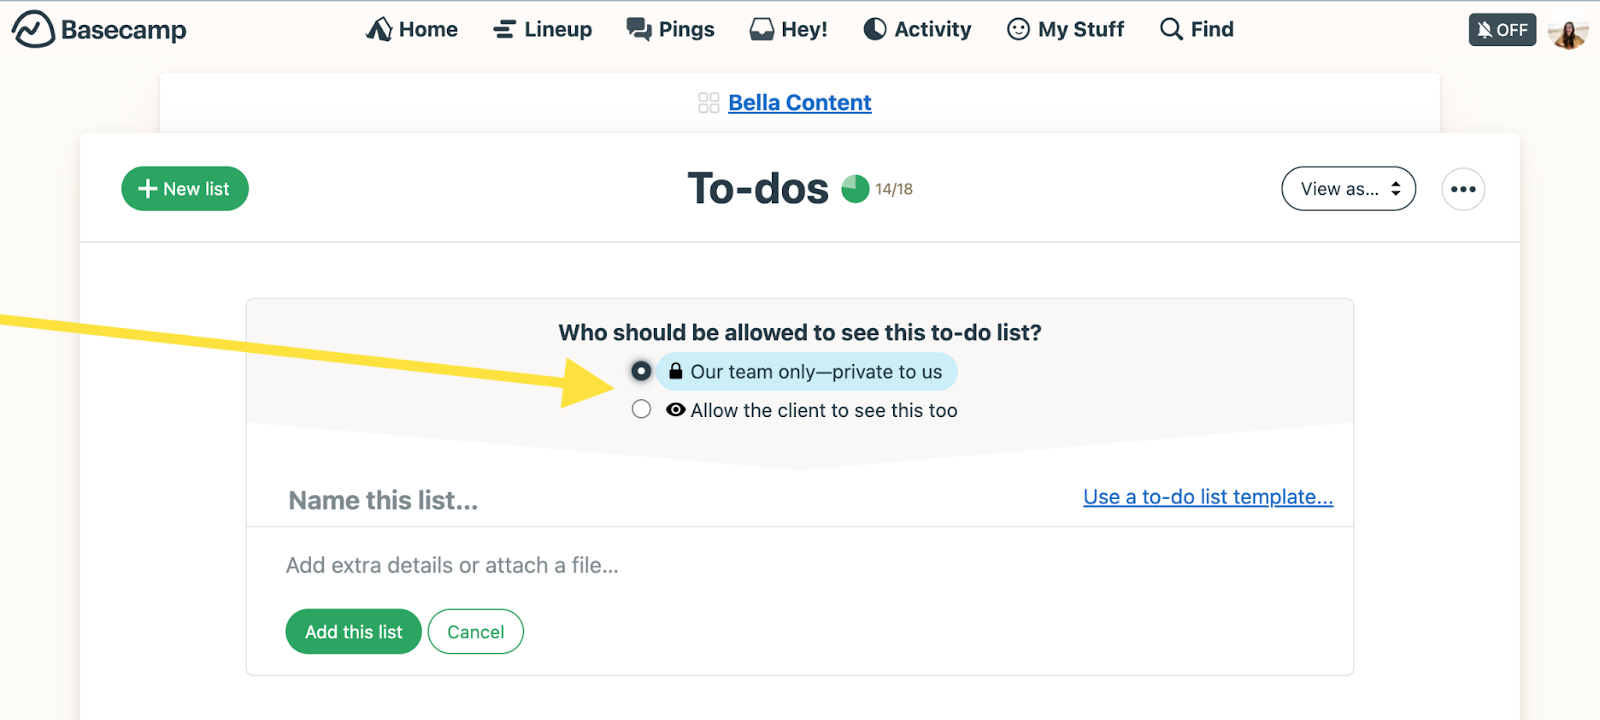 Options to share to-do lists with clients or keep it private to the team inside Basecamp’s software.